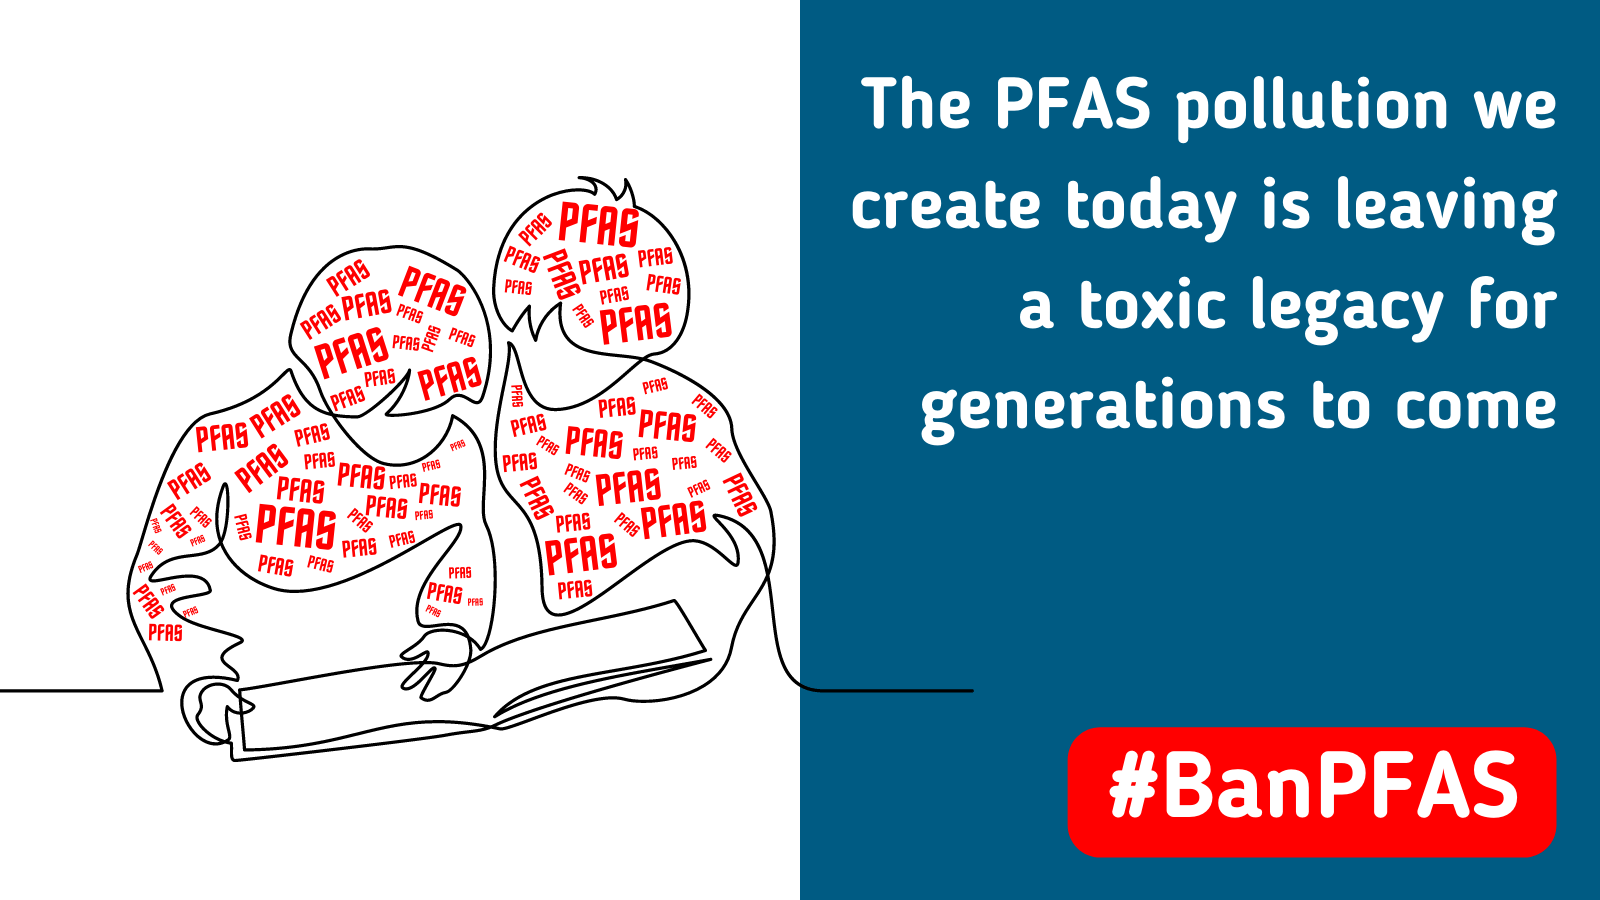 Civil society groups urge the EU to keep their promises to ban ‘forever chemicals’ PFAS